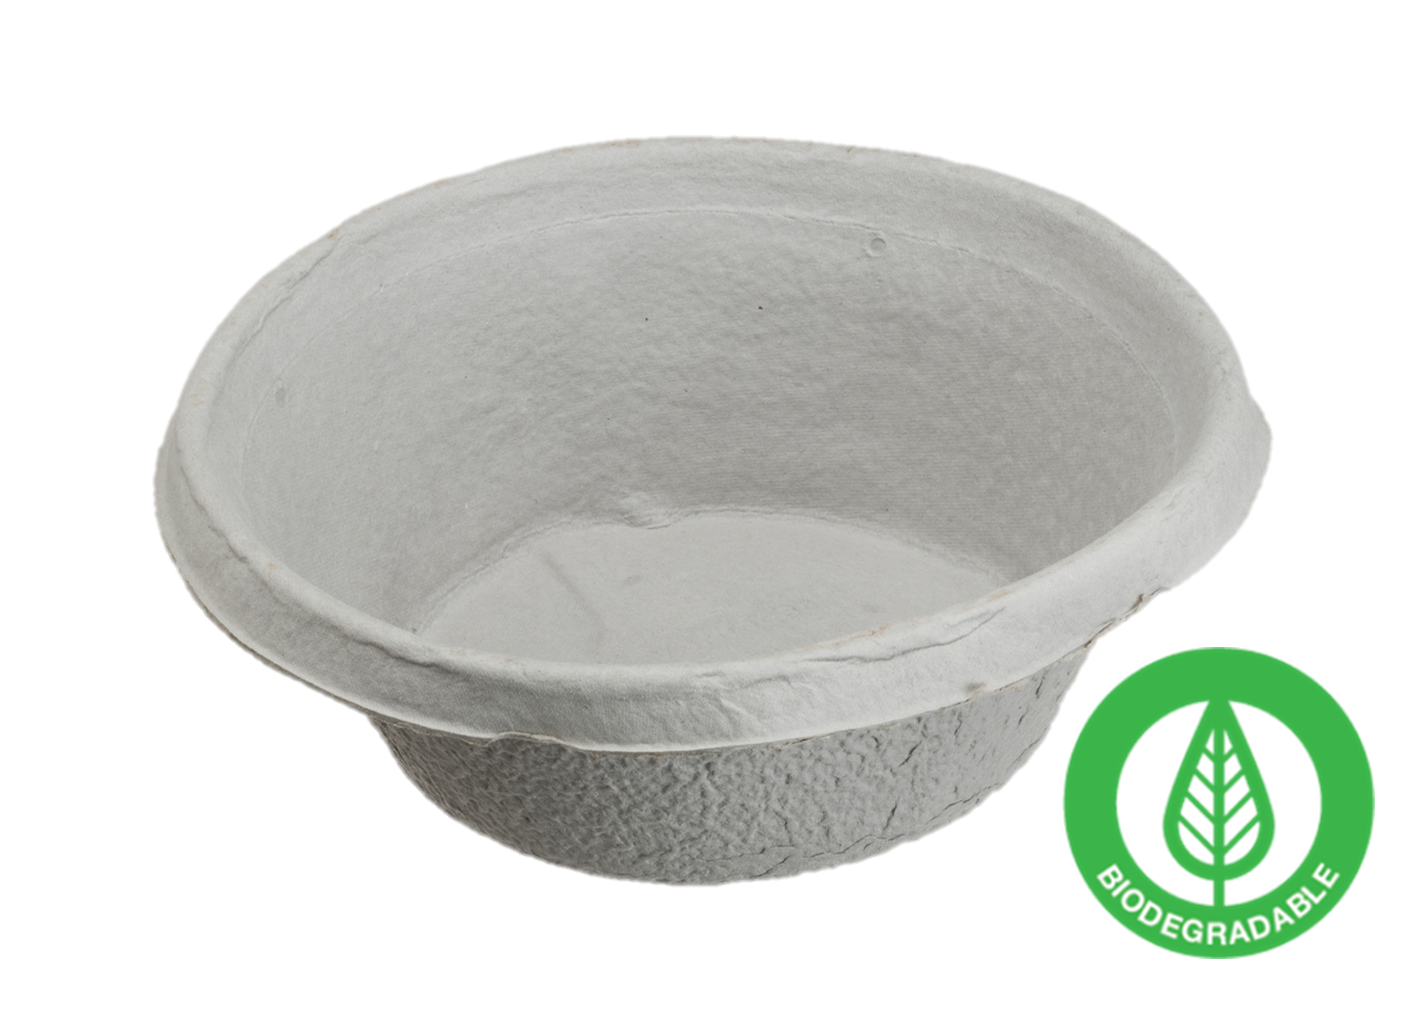 These large, 12-inch diameter single-use medical grade fiber bowls are constructed with a biodegradable pulp fiber made from 100% recycled newsprint and ideal for handling large fluid volumes. 